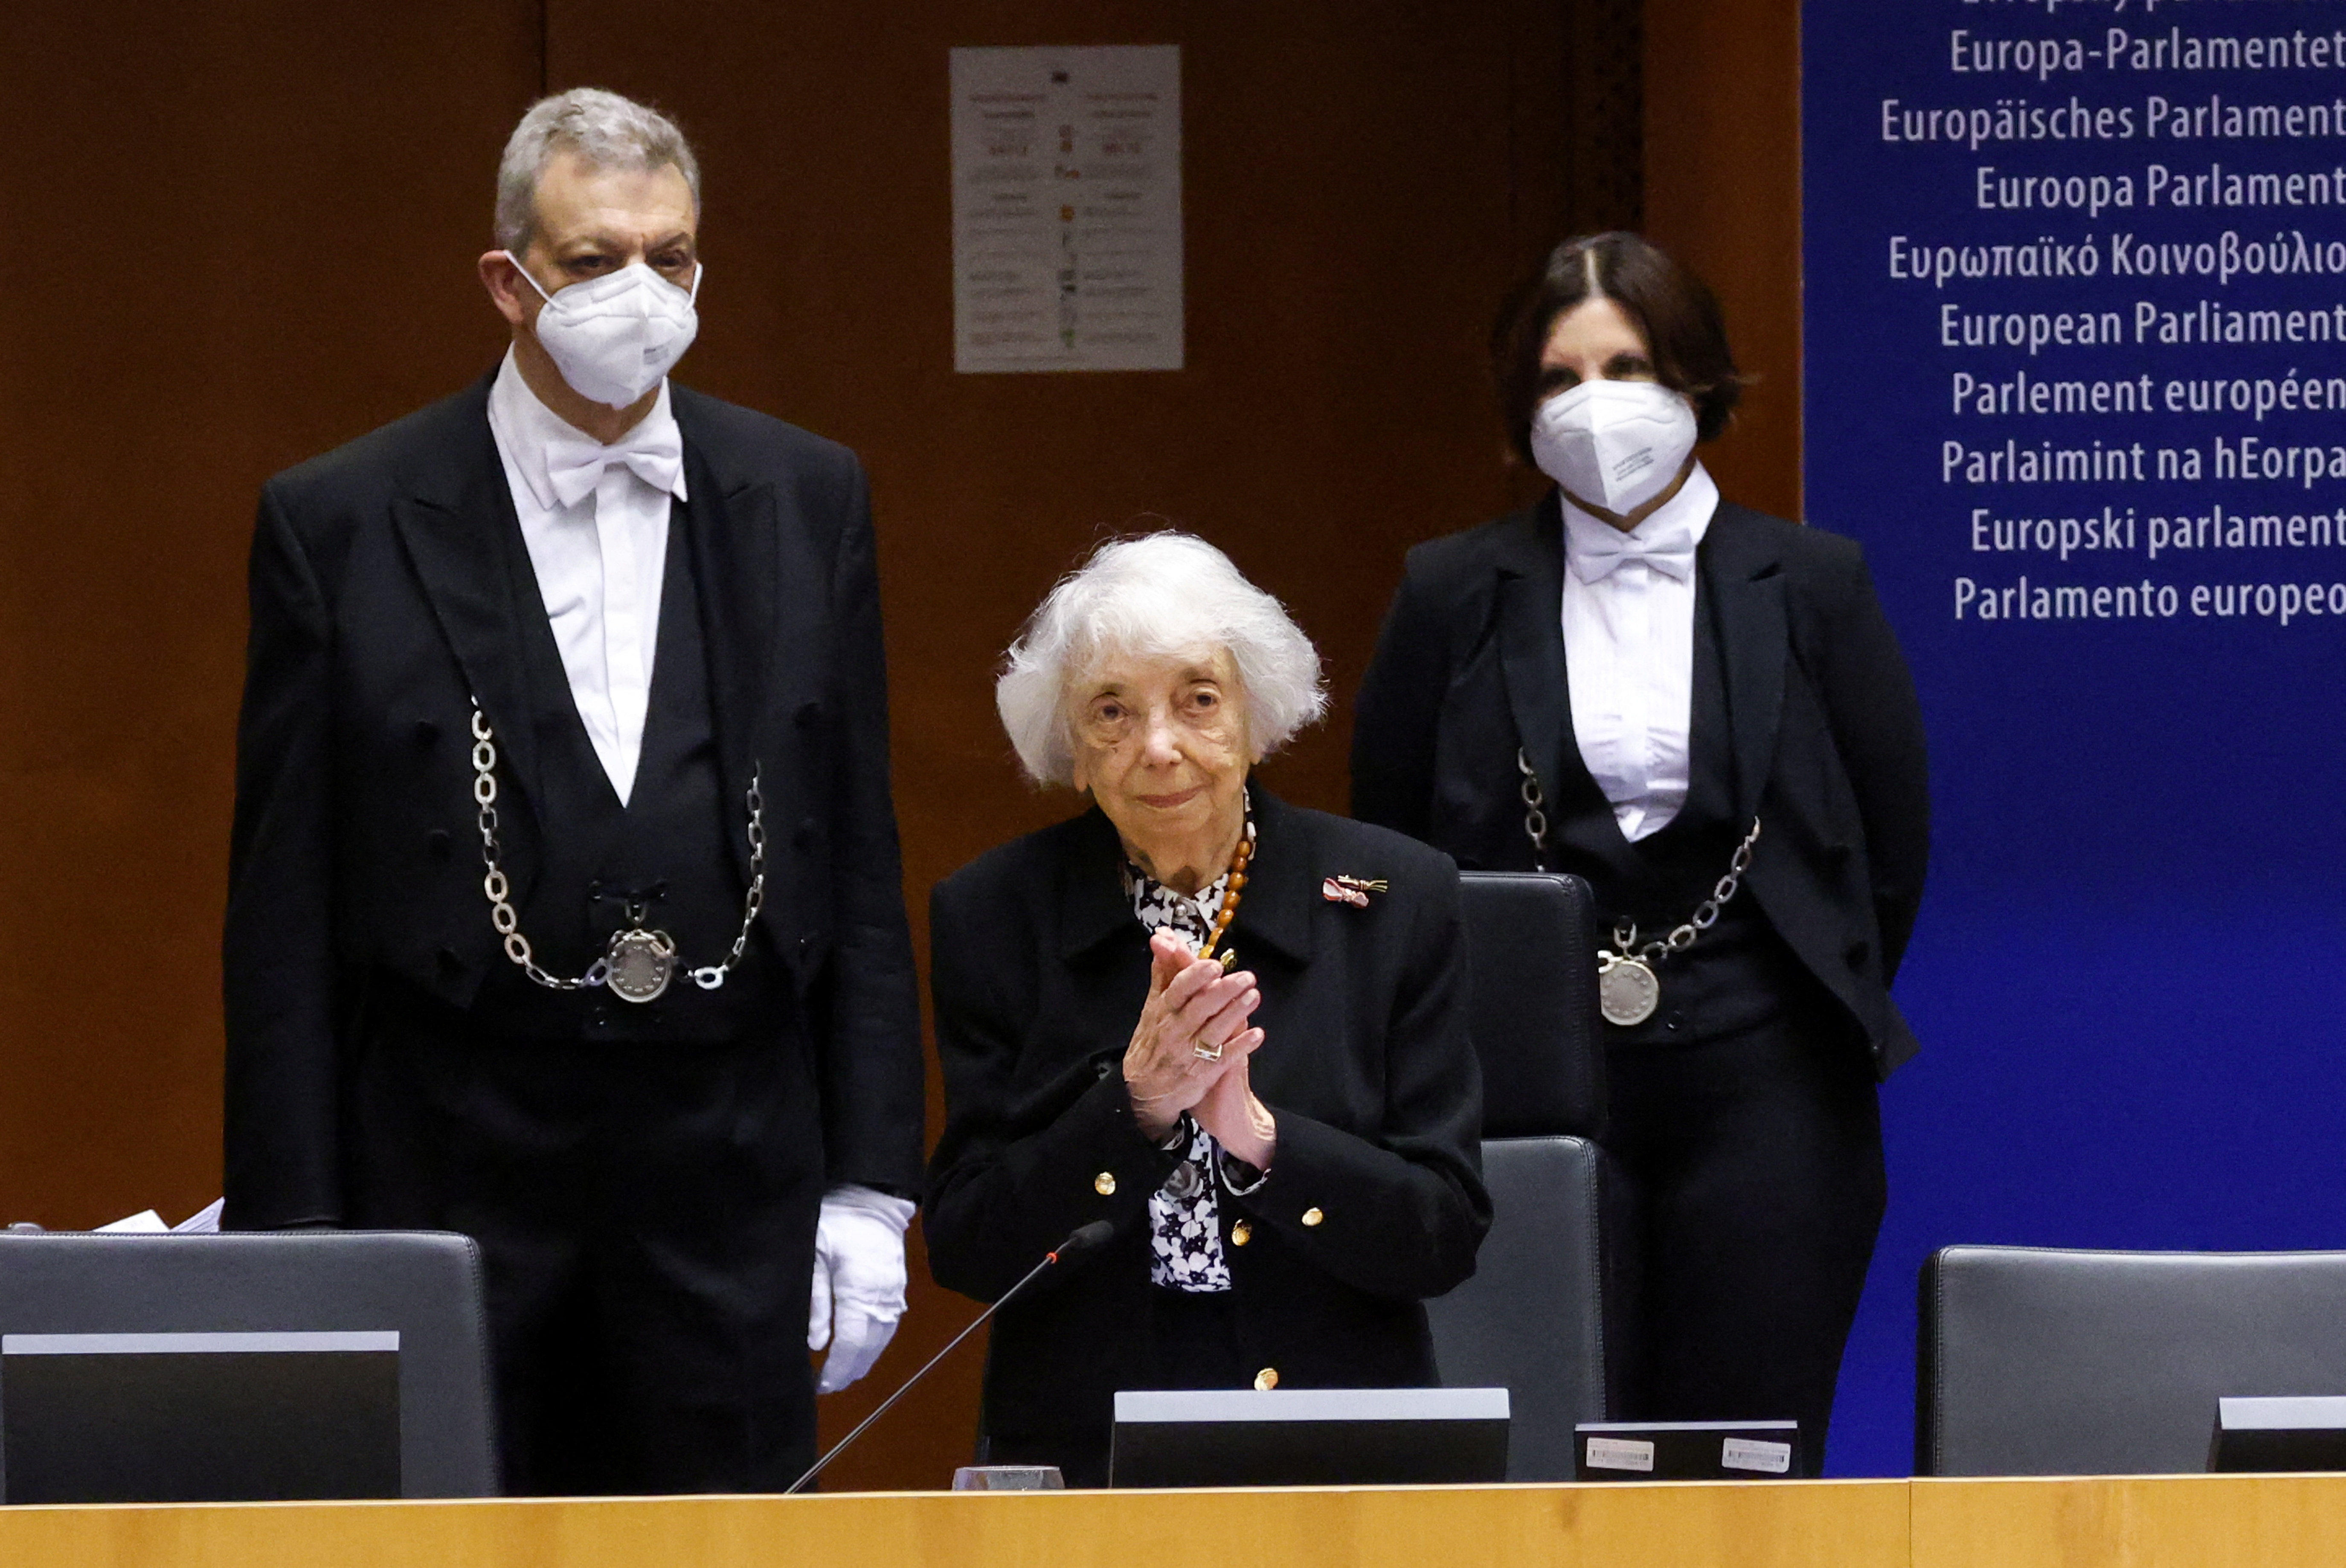 Holocaust survivor addresses EU lawmakers on memorial day, in Brussels